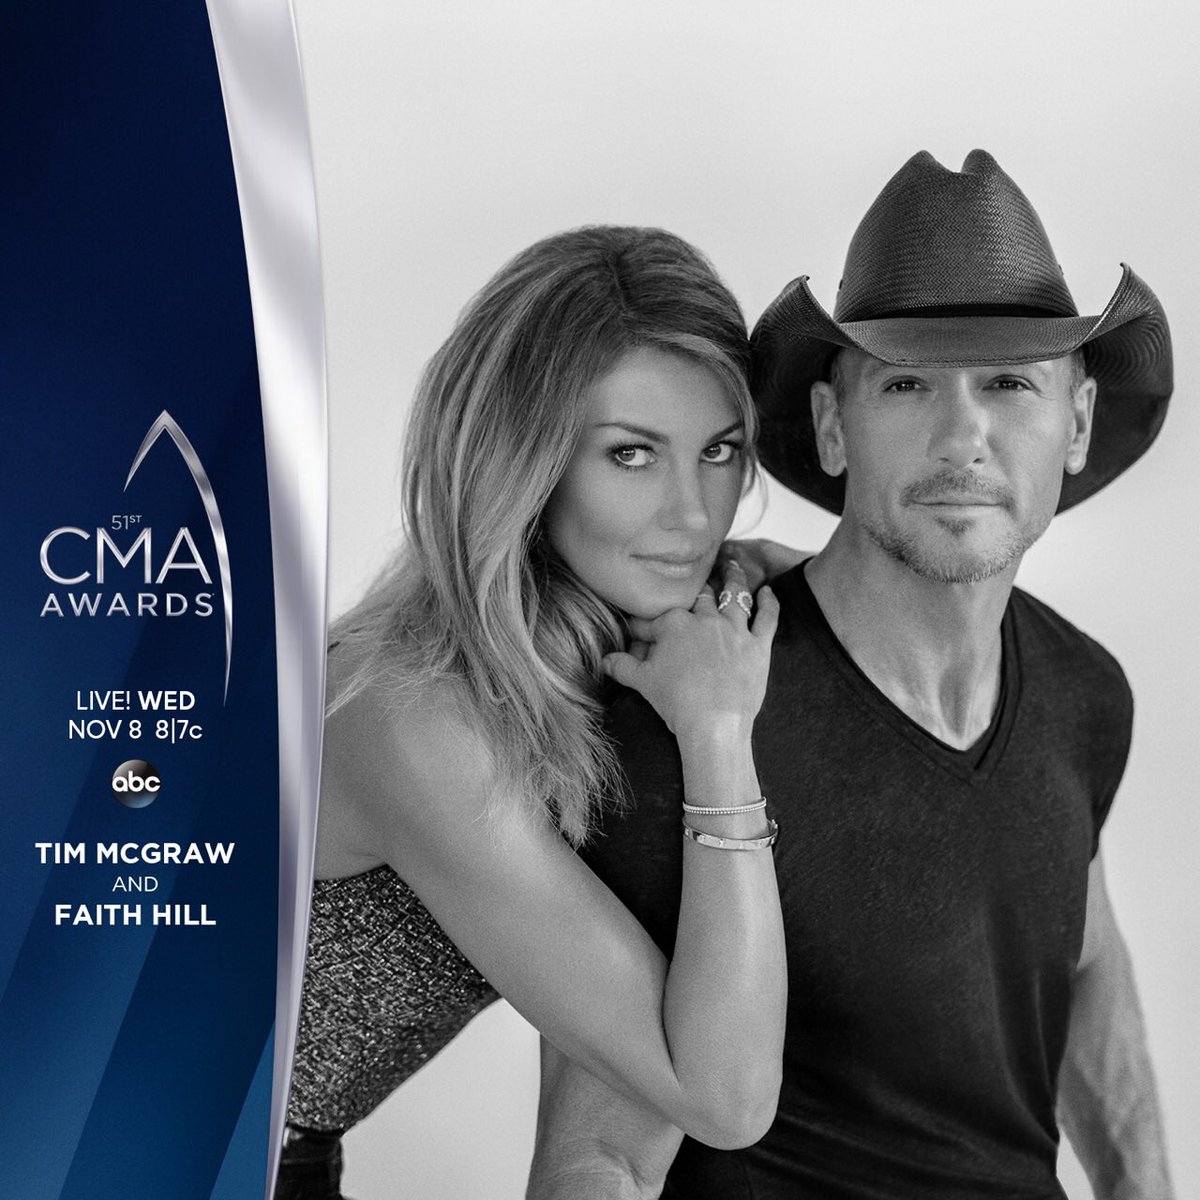 See you at the #CMAAwards Nov. 8th! https://t.co/2leQE16tX3